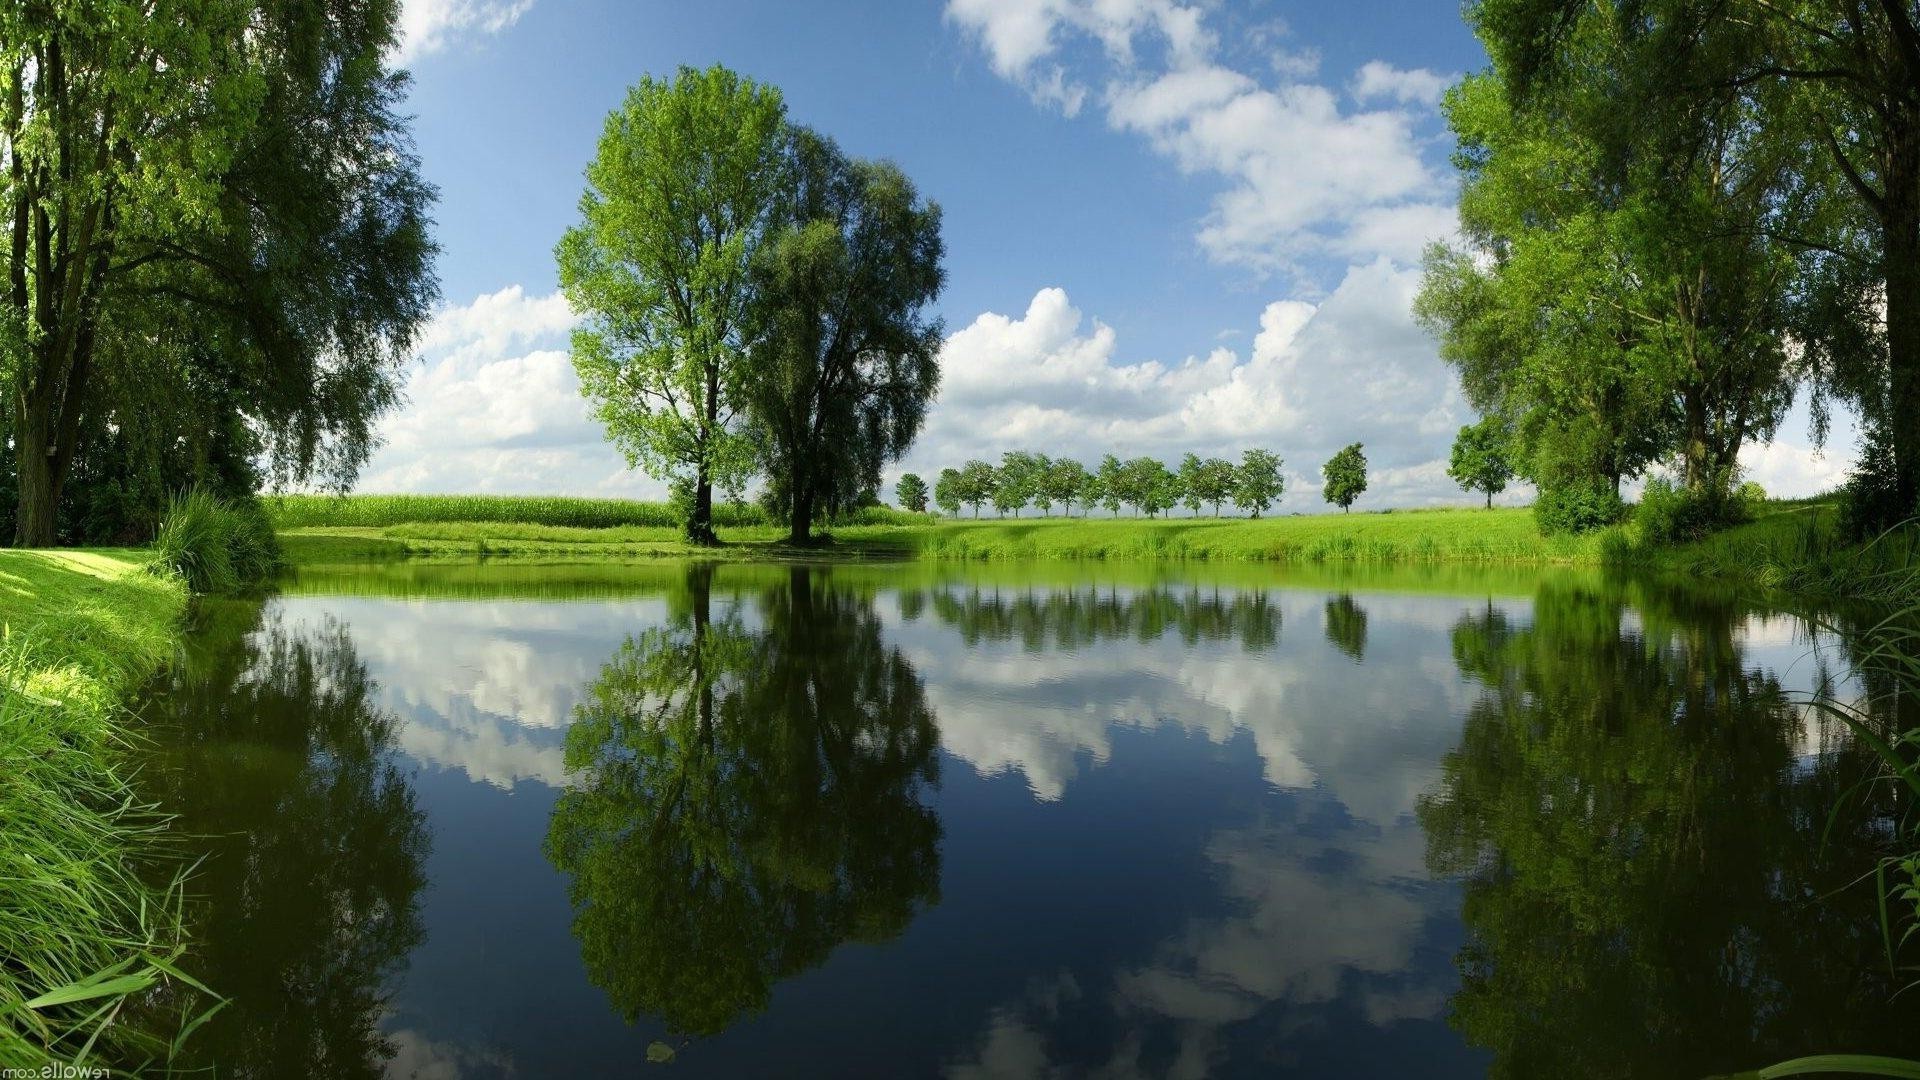 rivers ponds and streams water nature reflection tree landscape lake outdoors river summer wood pool grass leaf sky rural idyllic environment fair weather composure